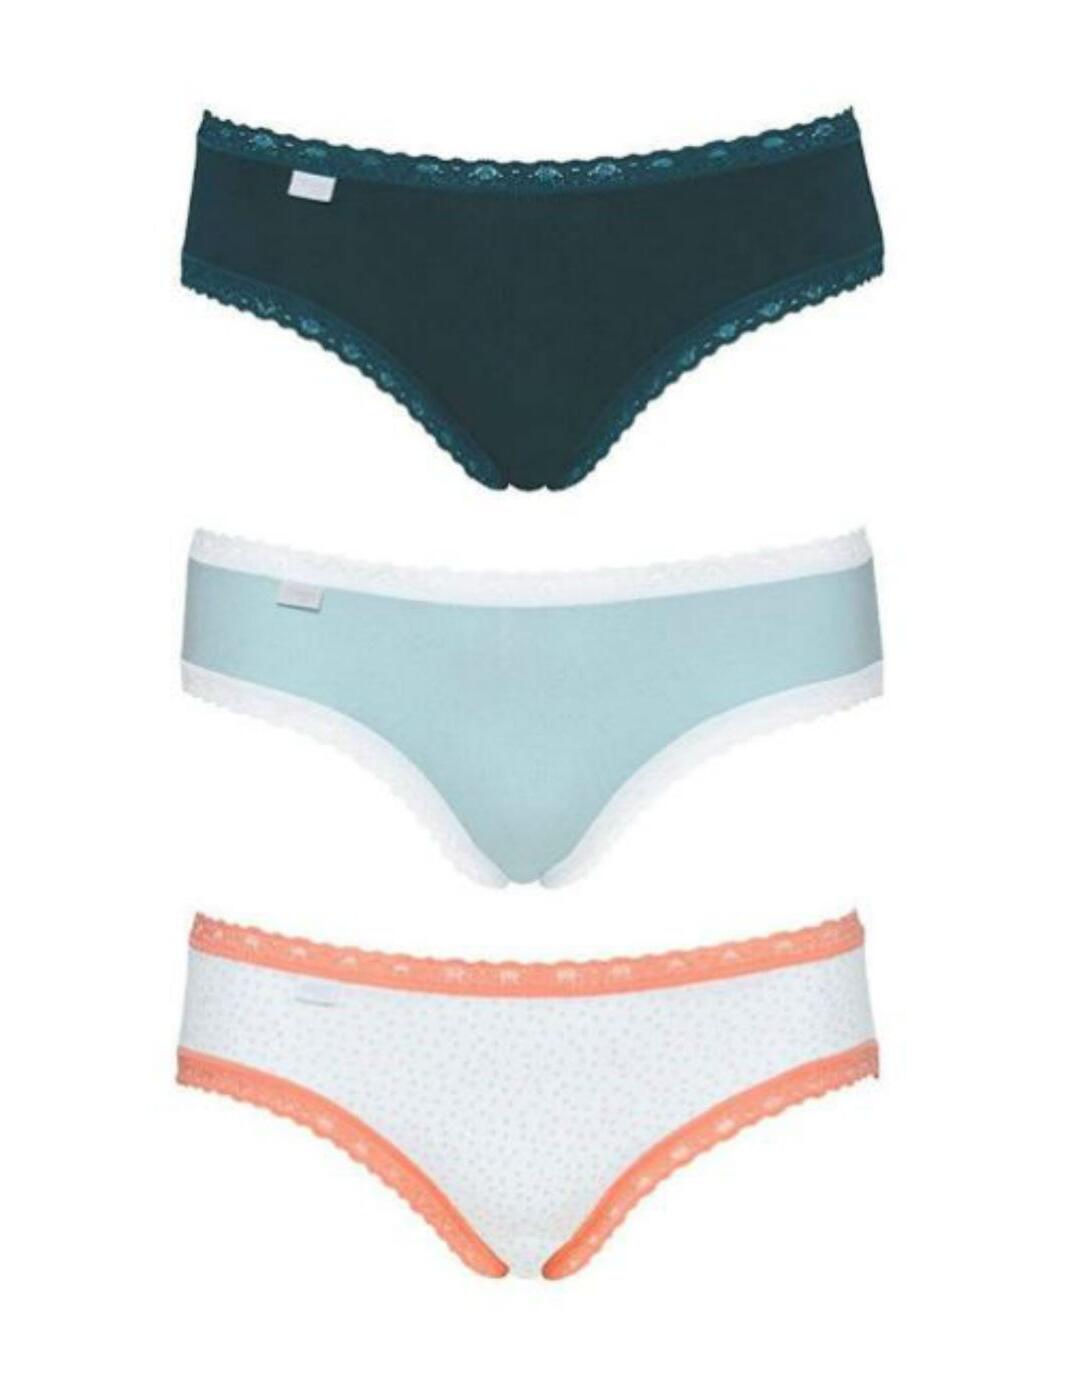 Hipster Briefs Mixed Colours 3 pack Sizes 10-16 SLOGGI 24x7 WEEKEND